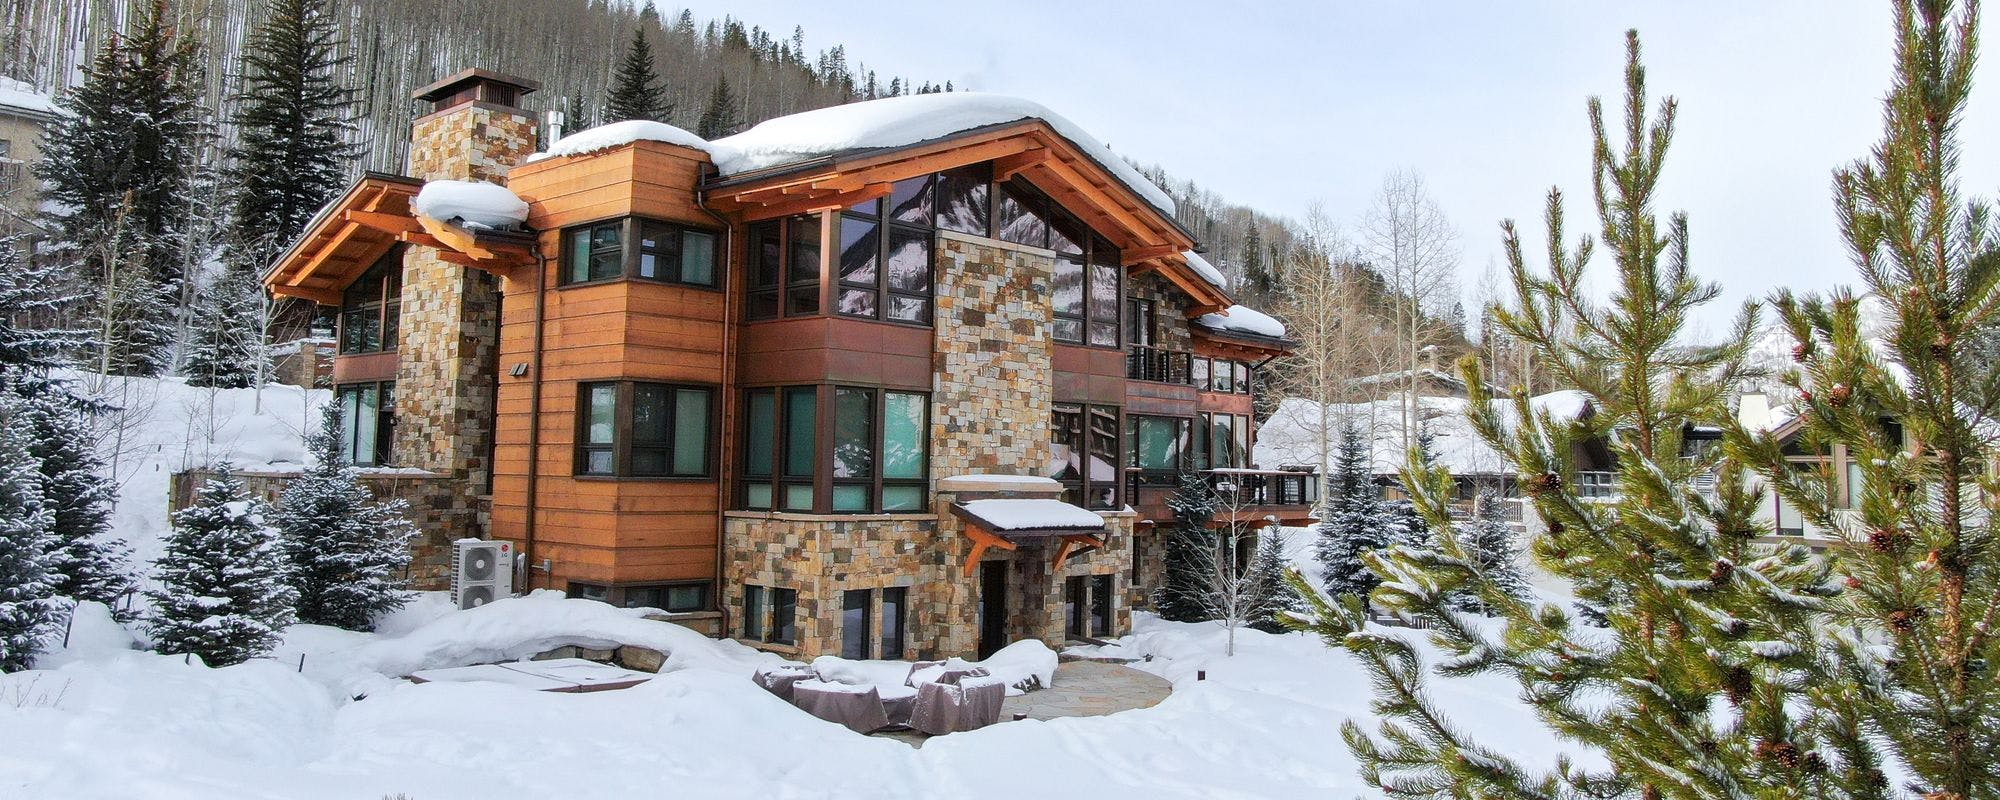 Vacation rental home nestled in the mountains of Vail Valley